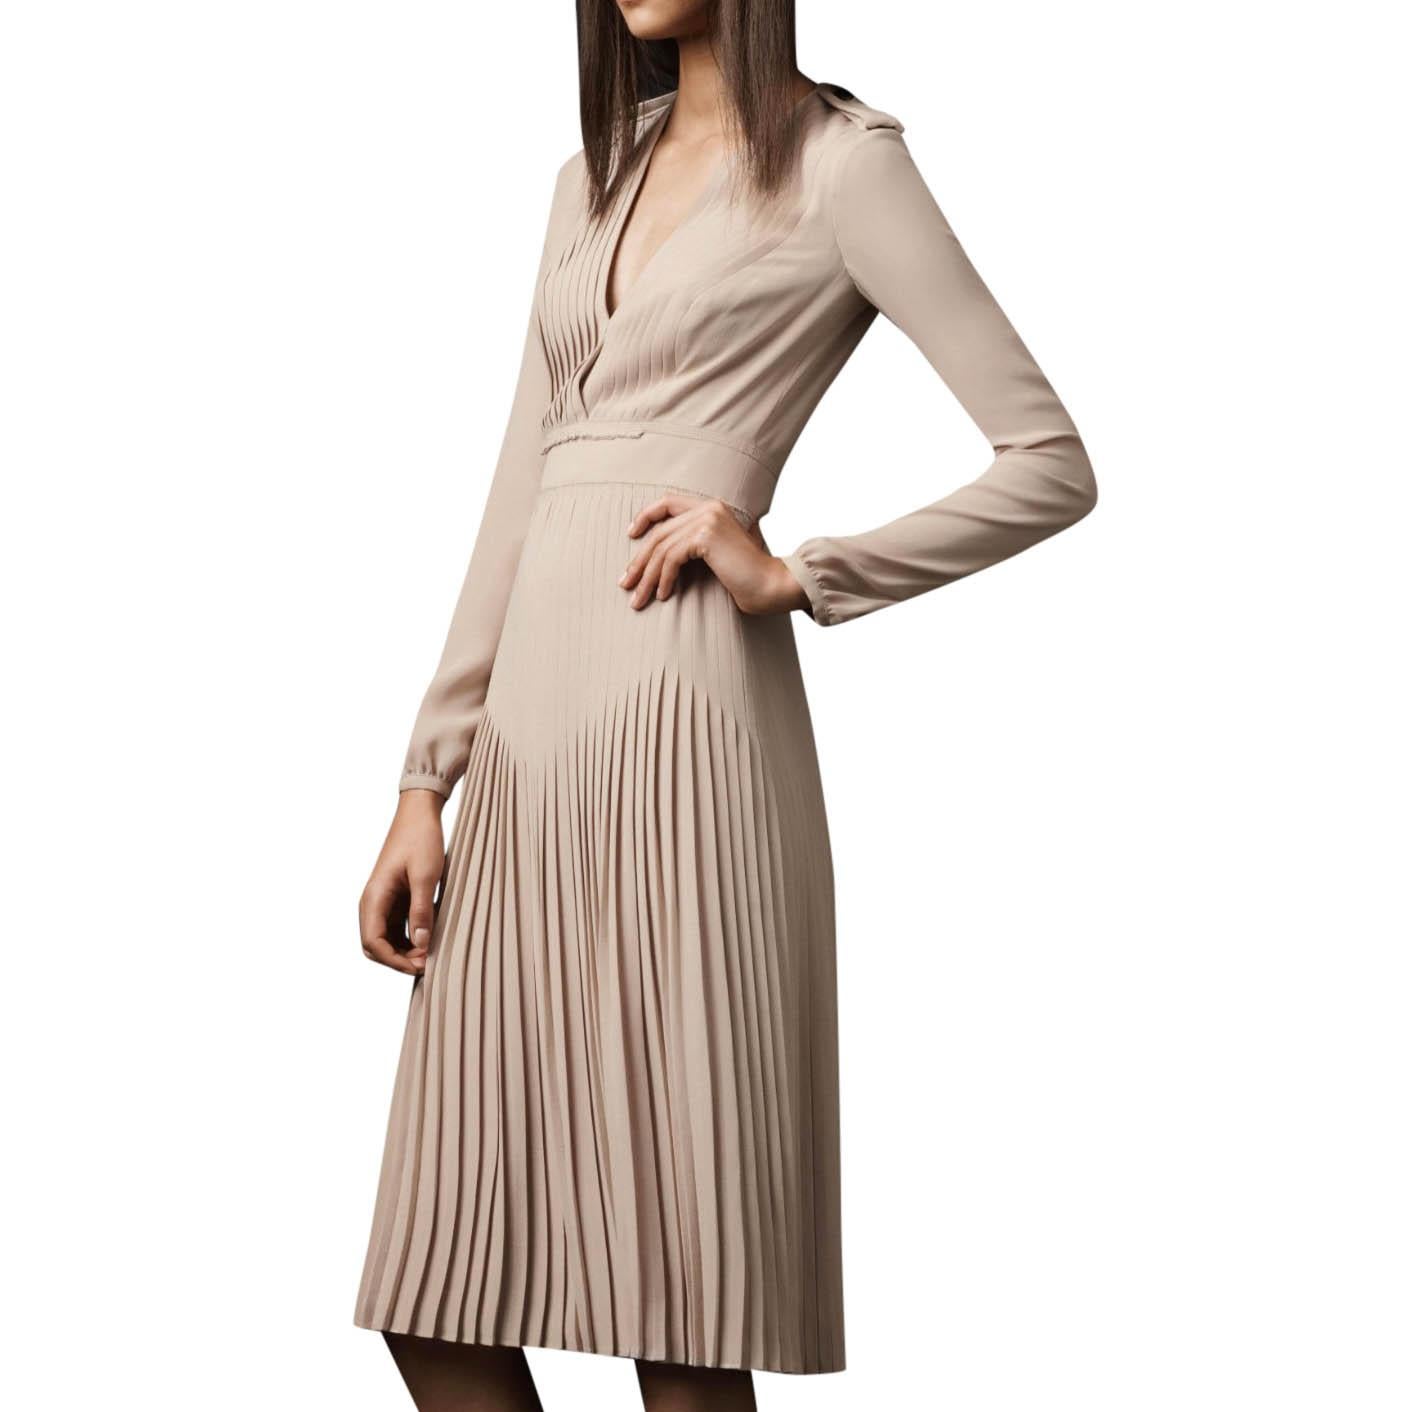 Burberry Prorsum Pleated Silk V-Neck Dress 

-Nude, mid-weight silk
-Lined
-Deep v-neck
-Back keyhole
-Back centre zip fastening
-Bishop long sleeves 
-Pleated skirt 
-Waist panneling detail 
-Shoulder epaulettes
- 100% Silk

Approx.
Measurements